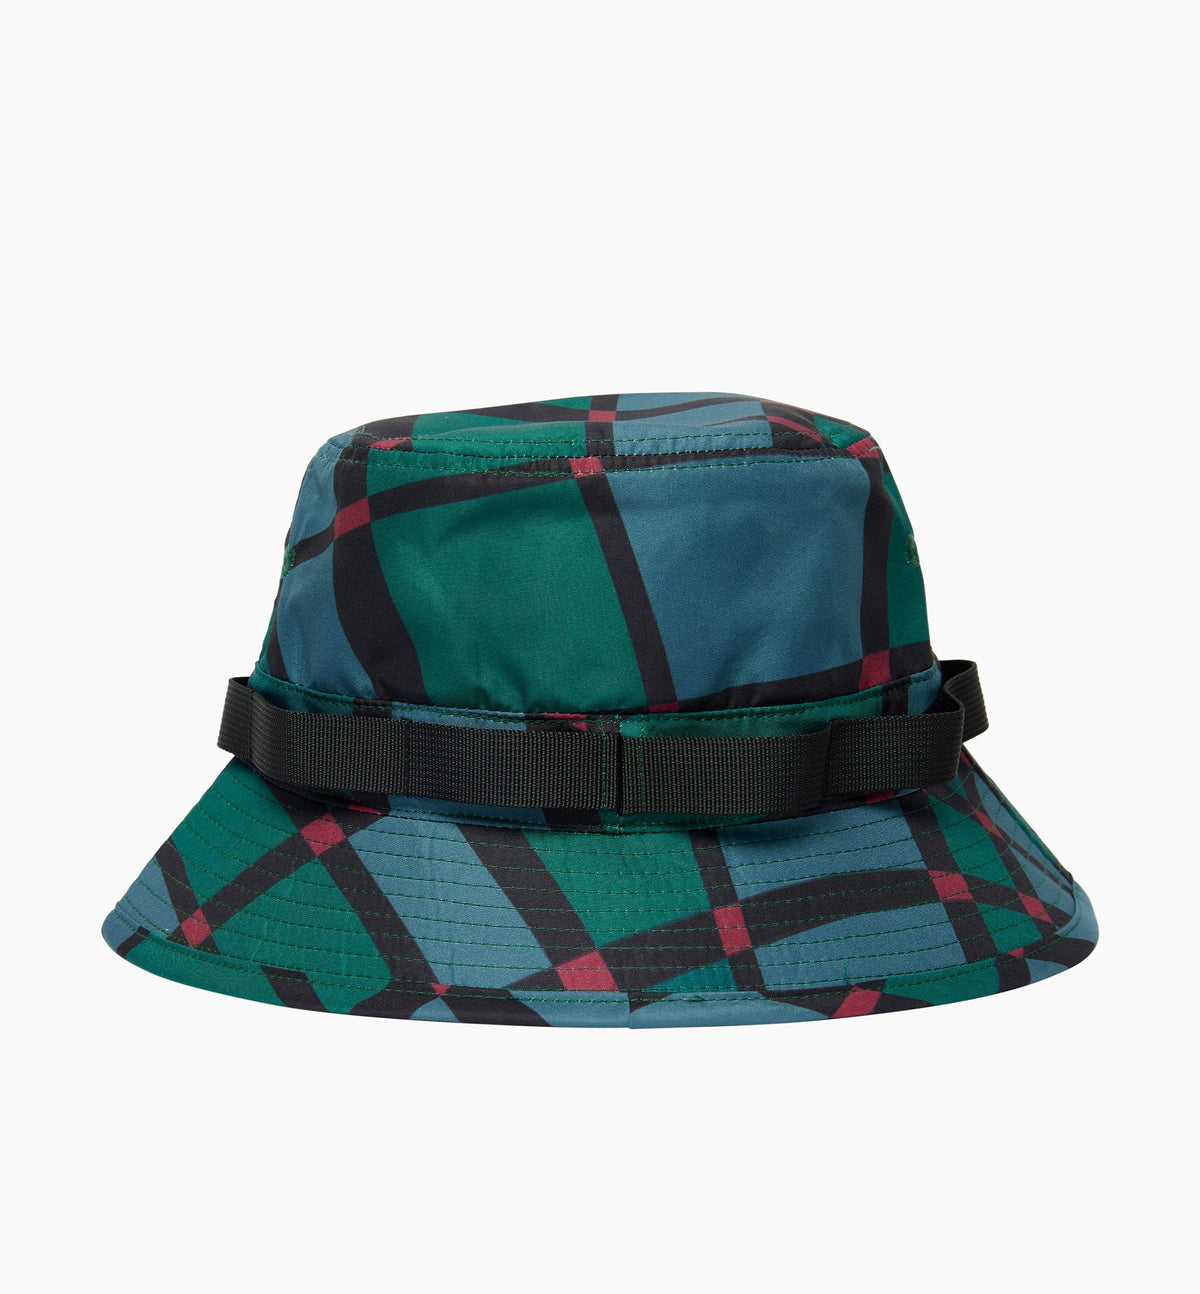 By parra squared waves pattern safari hat